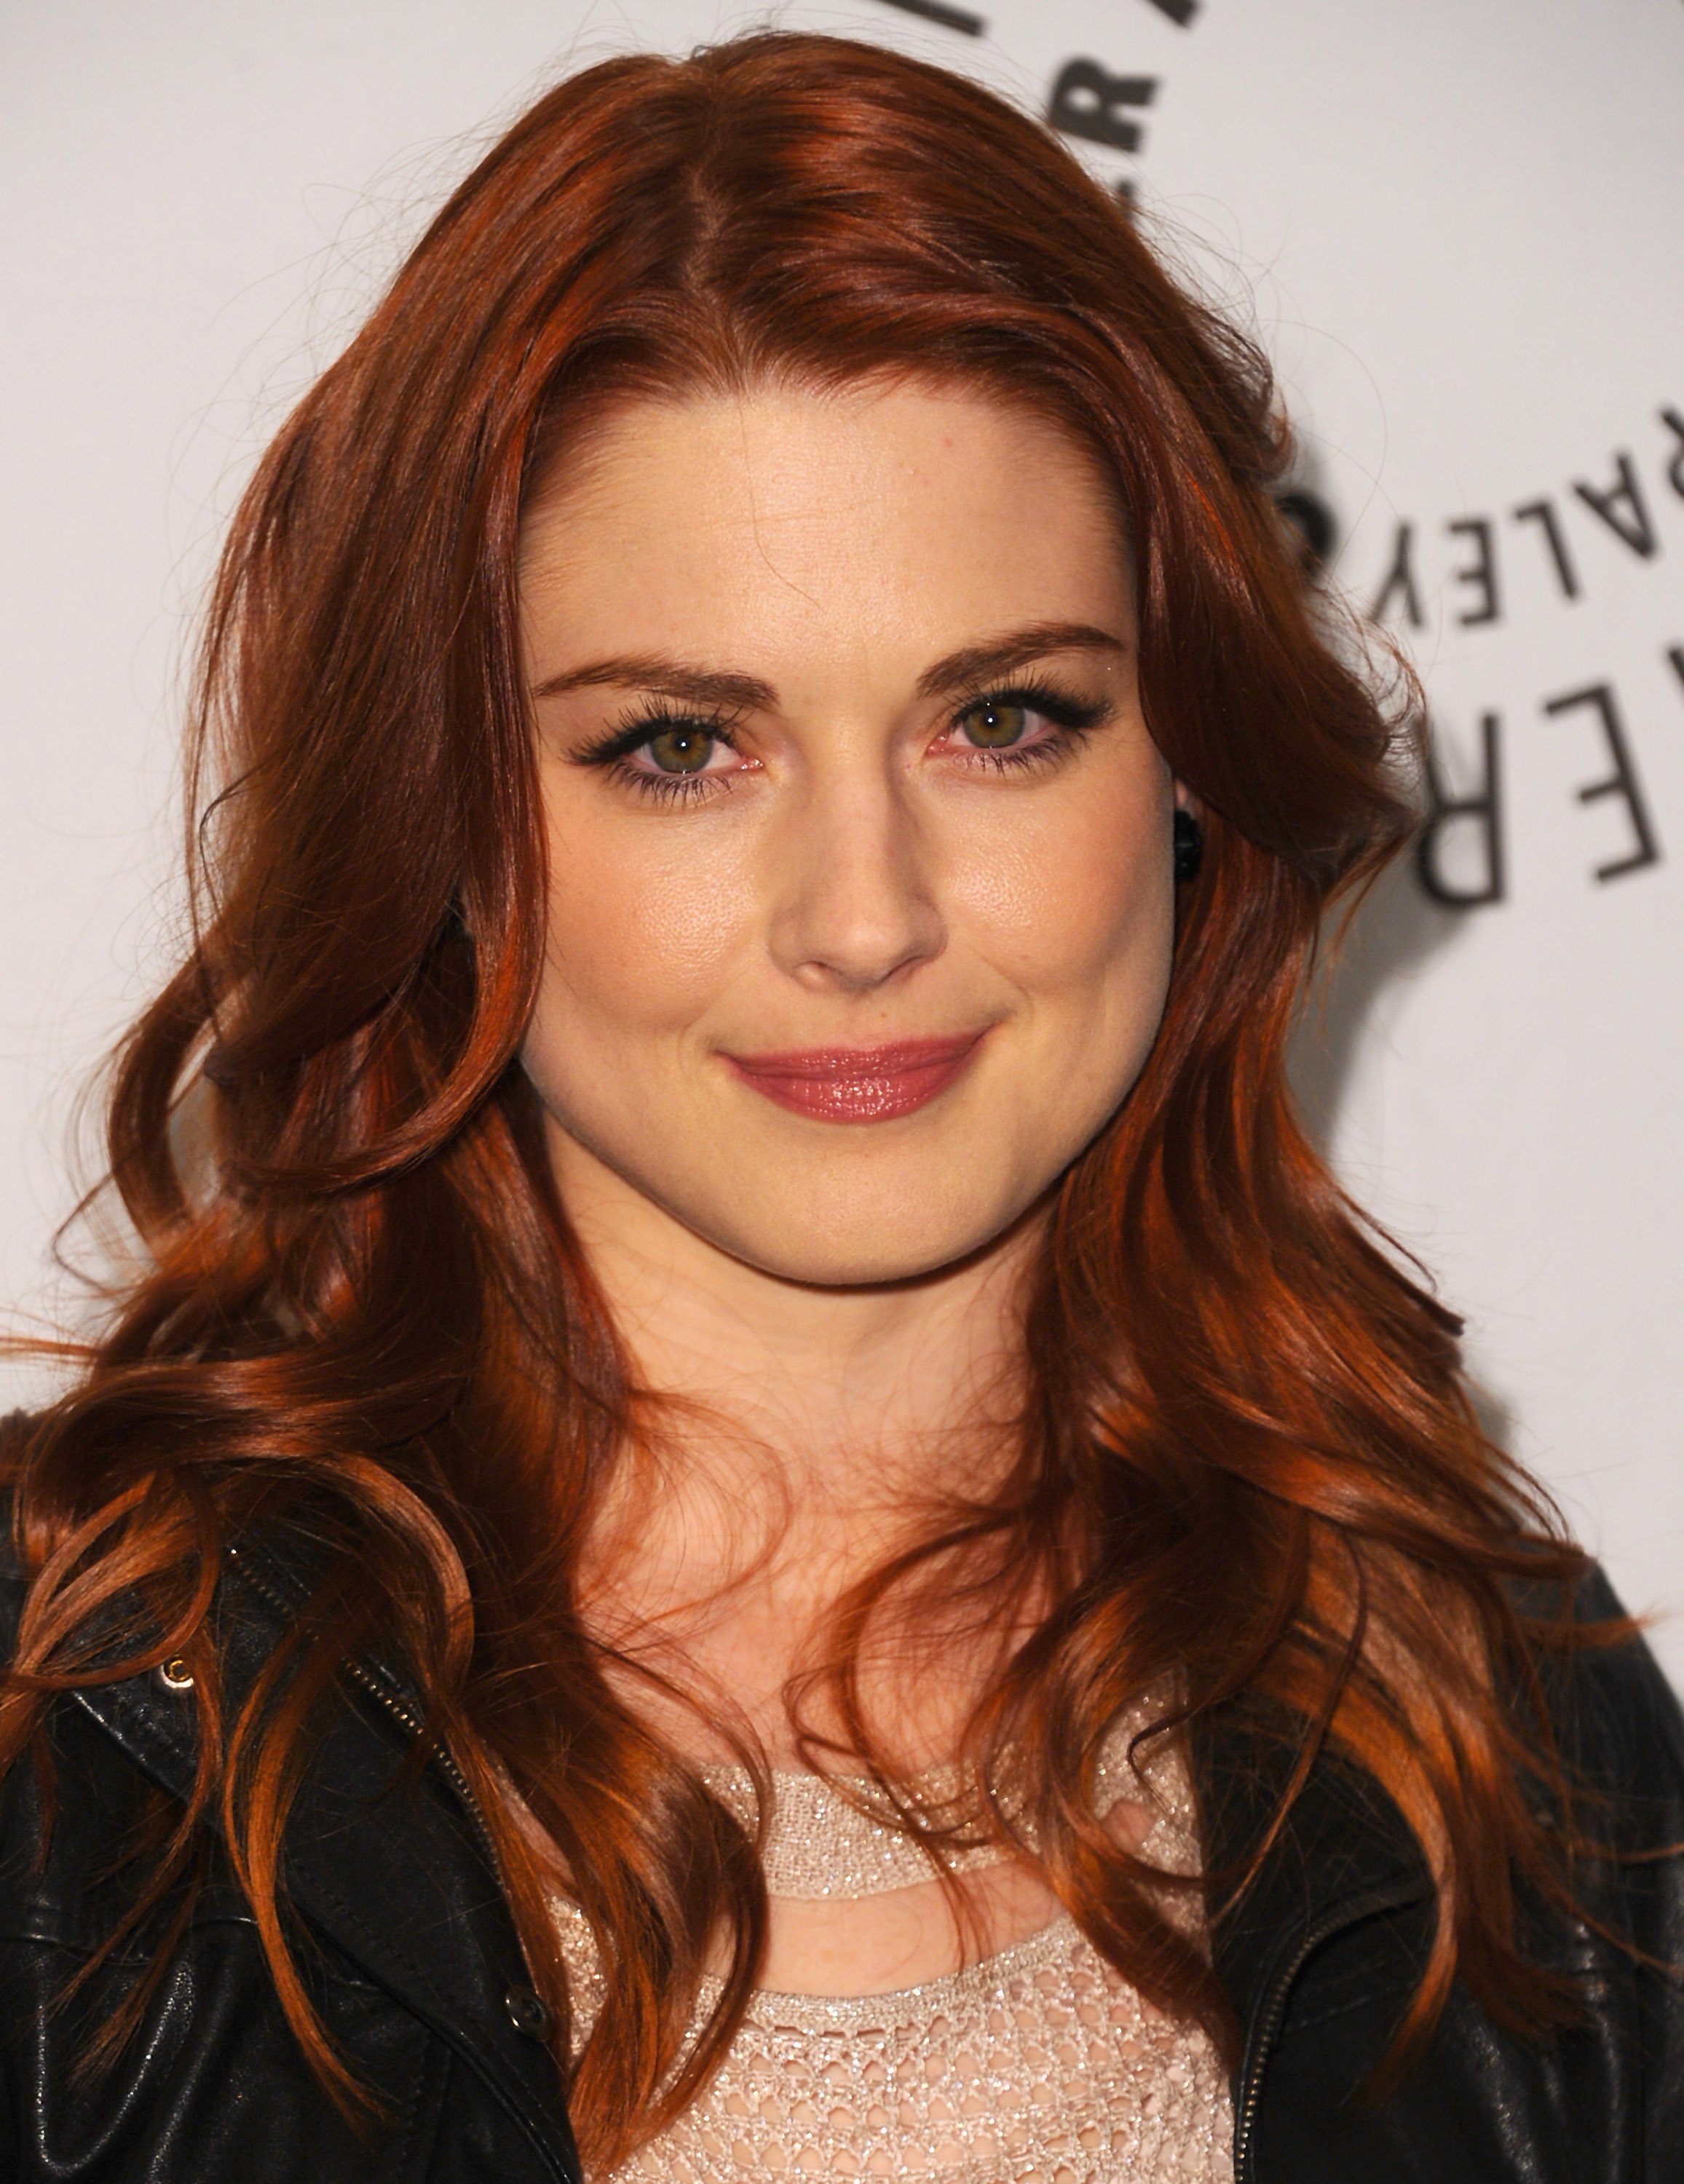 Alexandra Breckenridge arrives to The Paley Center for Media's PaleyFest 2012 honoring "American Horror Story" at Saban Theatre on March 2, 2012 in Beverly Hills, California. | Source: Getty Images